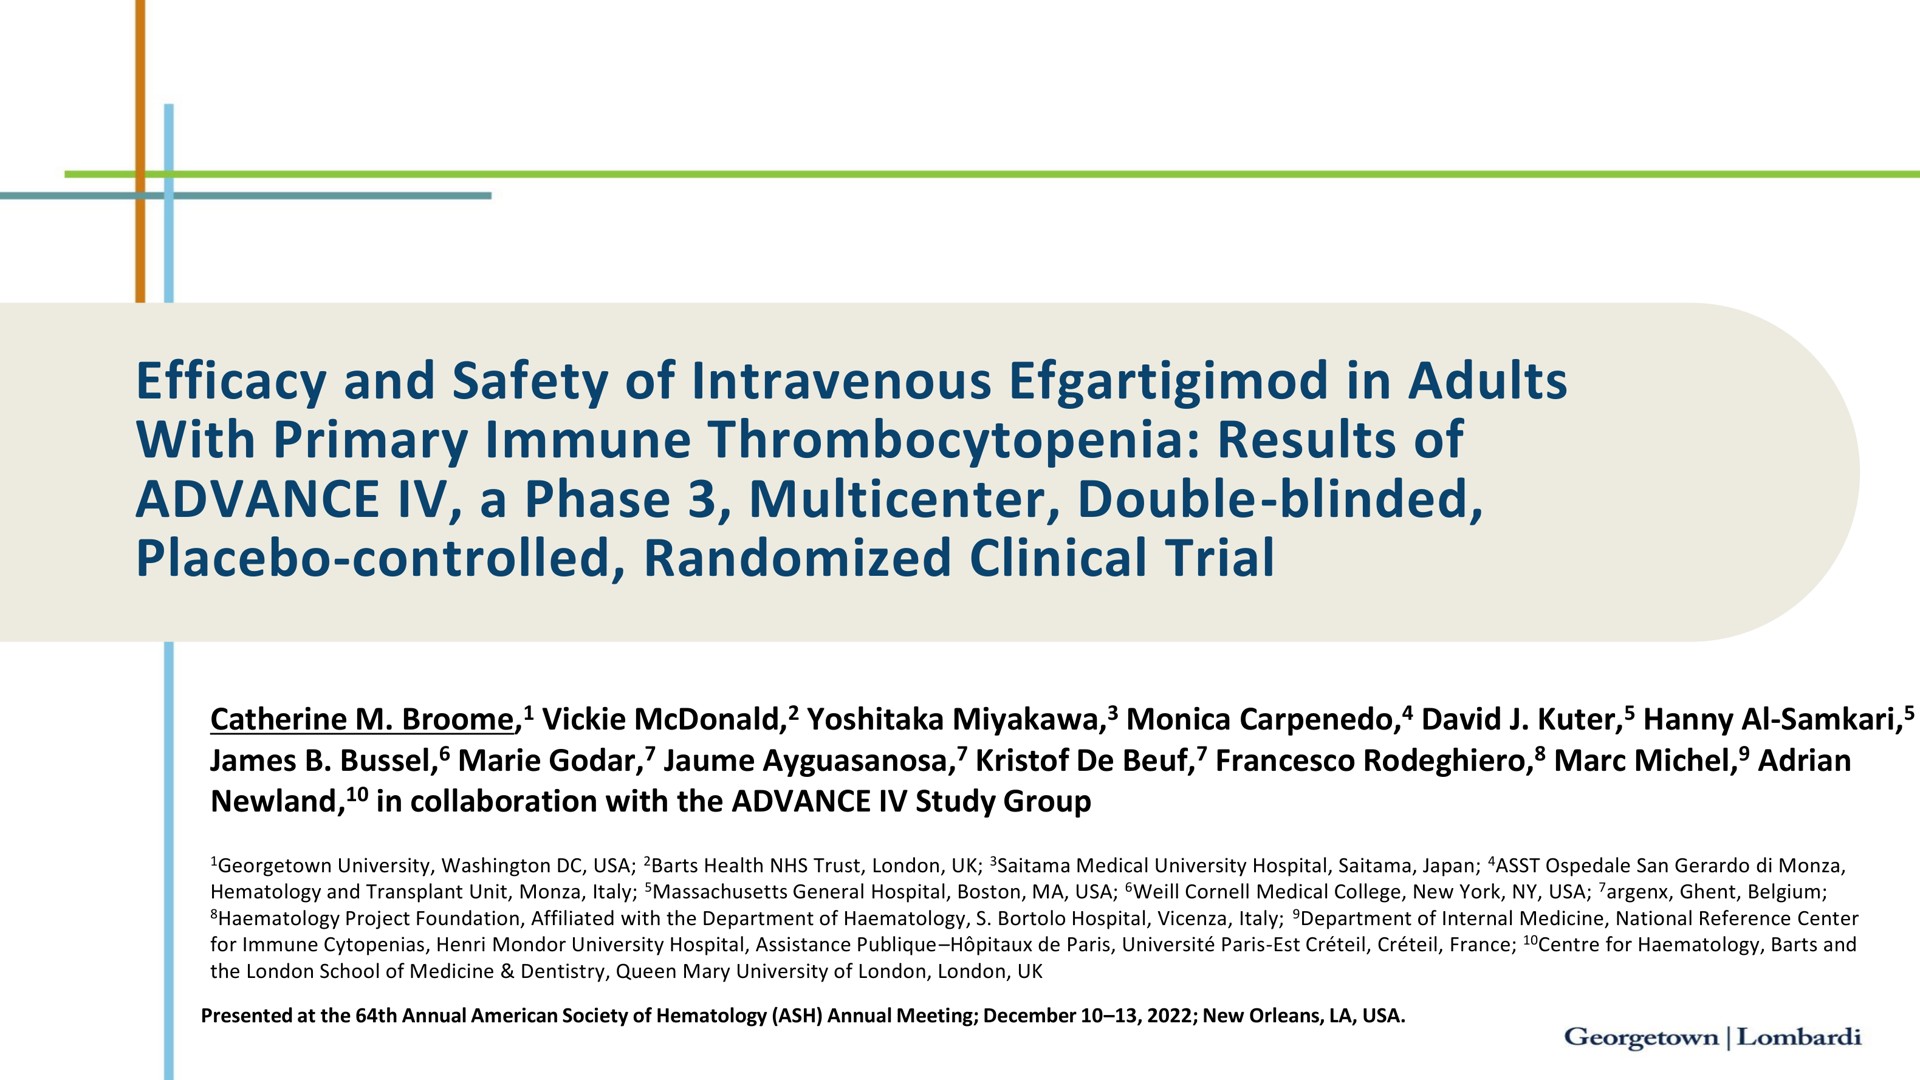 efficacy and safety of intravenous in adults with primary immune thrombocytopenia results of advance a phase double blinded placebo controlled randomized clinical trial | argenx SE